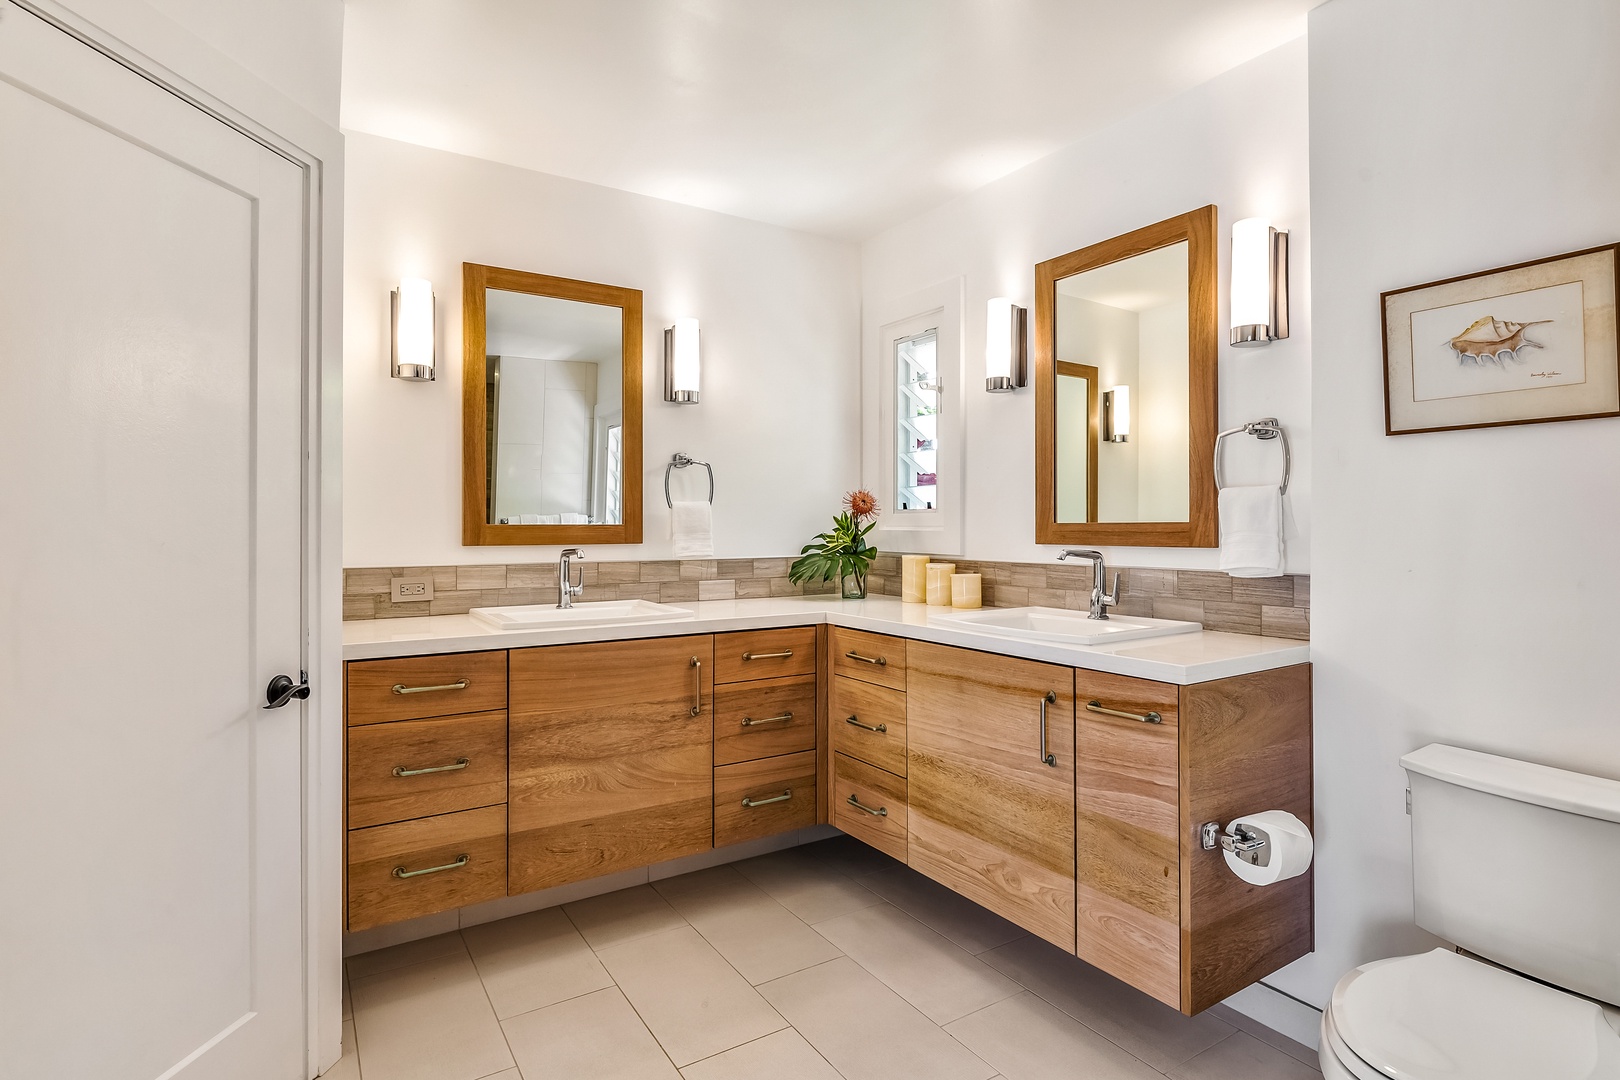 Kailua Vacation Rentals, Hale Ohana - The primary ensuite has an L-shaped dual vanity